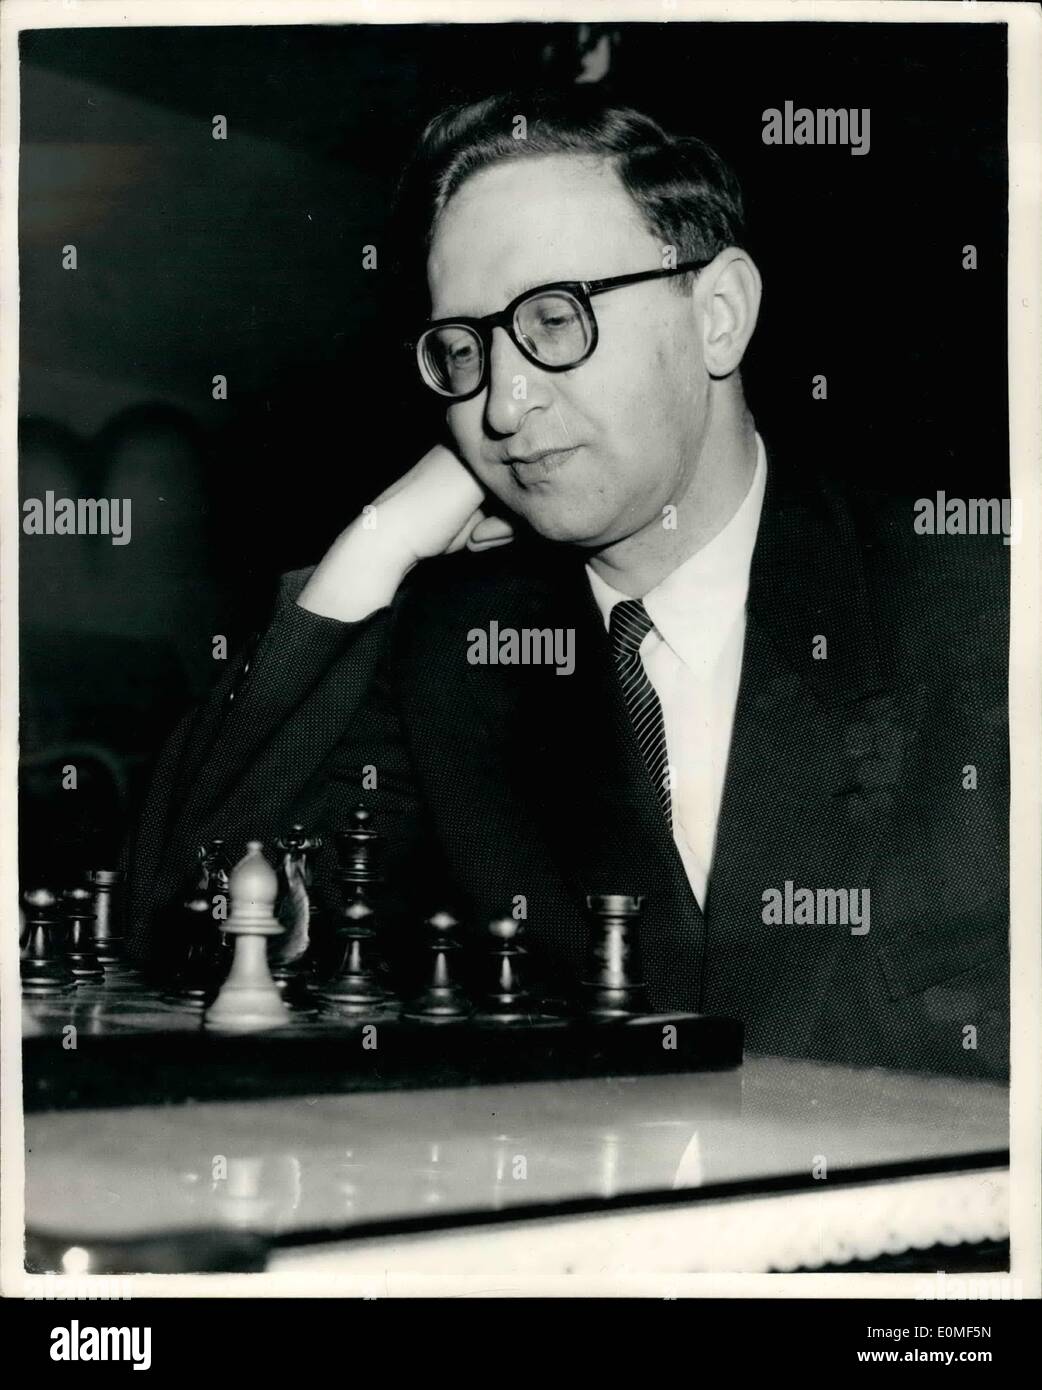 Dec. 12, 1954 - Opening of the Hastings International Chess Tournament . the player from Soviet Russia:Competitors from all parts of the world care taking part in the International Chess Tournament which opened at the Hasting Pavilion today. Photo Show Vasily Smyslov one of the Soviet Competitors Man at Hasting today. Stock Photo